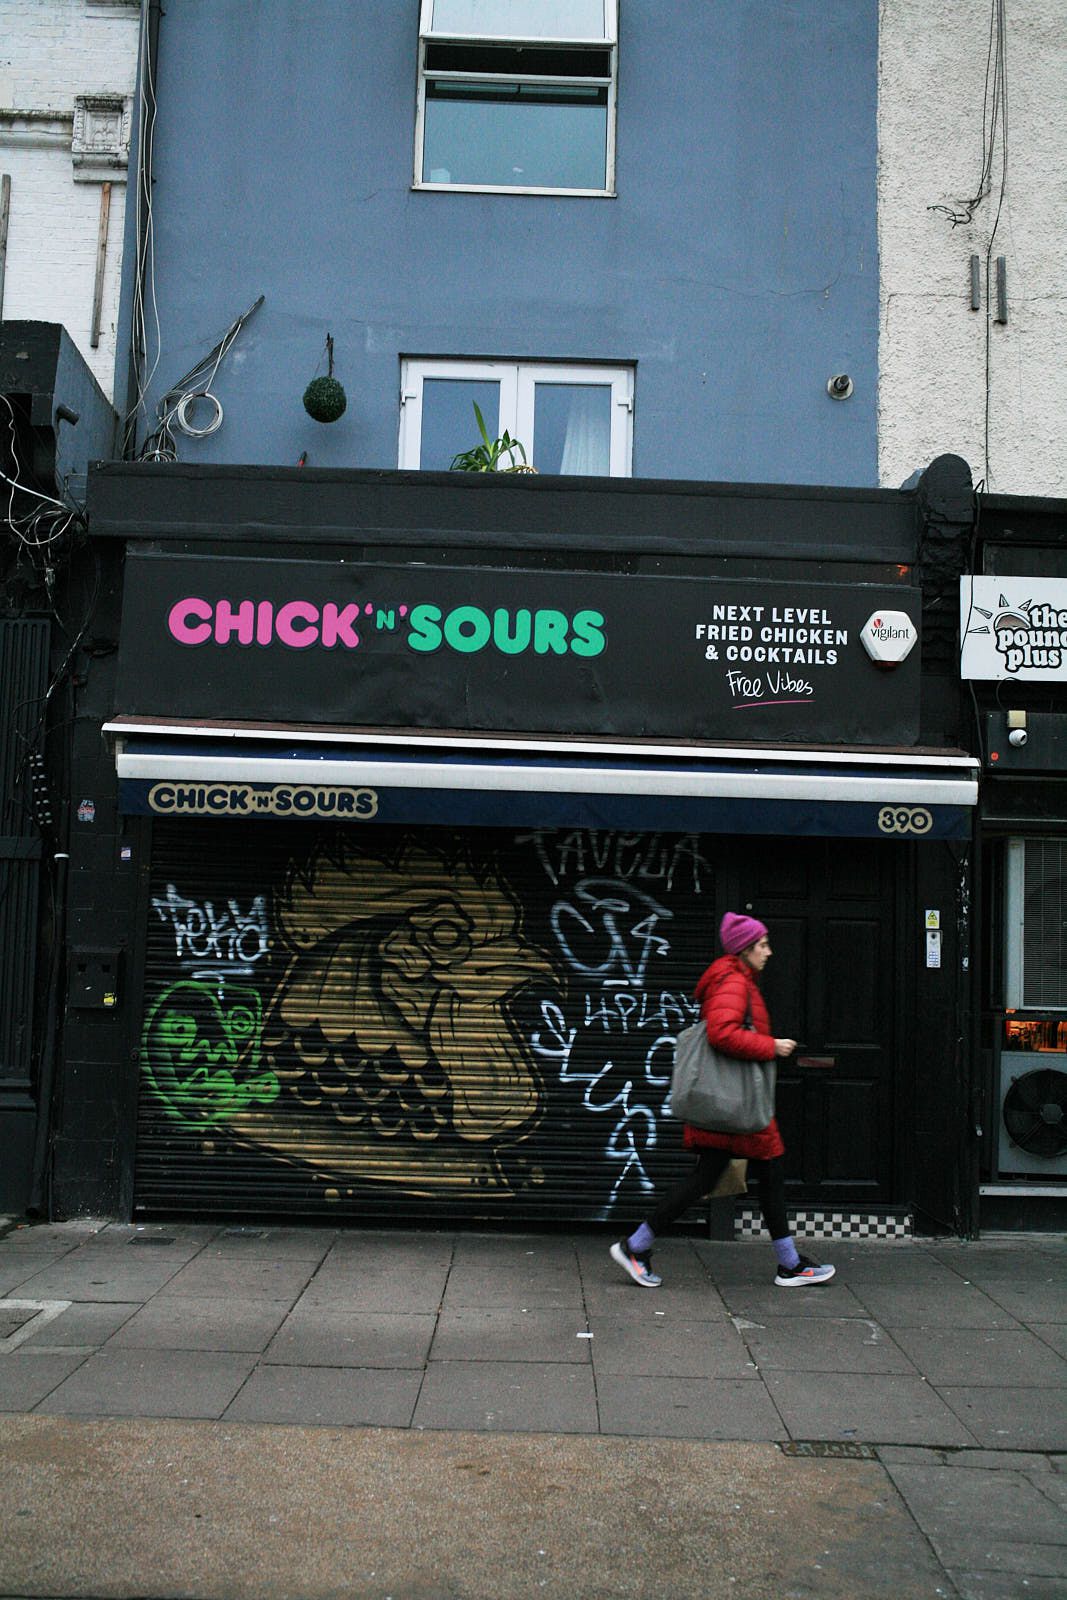 A person walks past Chick ‘n’ Sours which has been shut due to the omicron wave of covid-19 in London